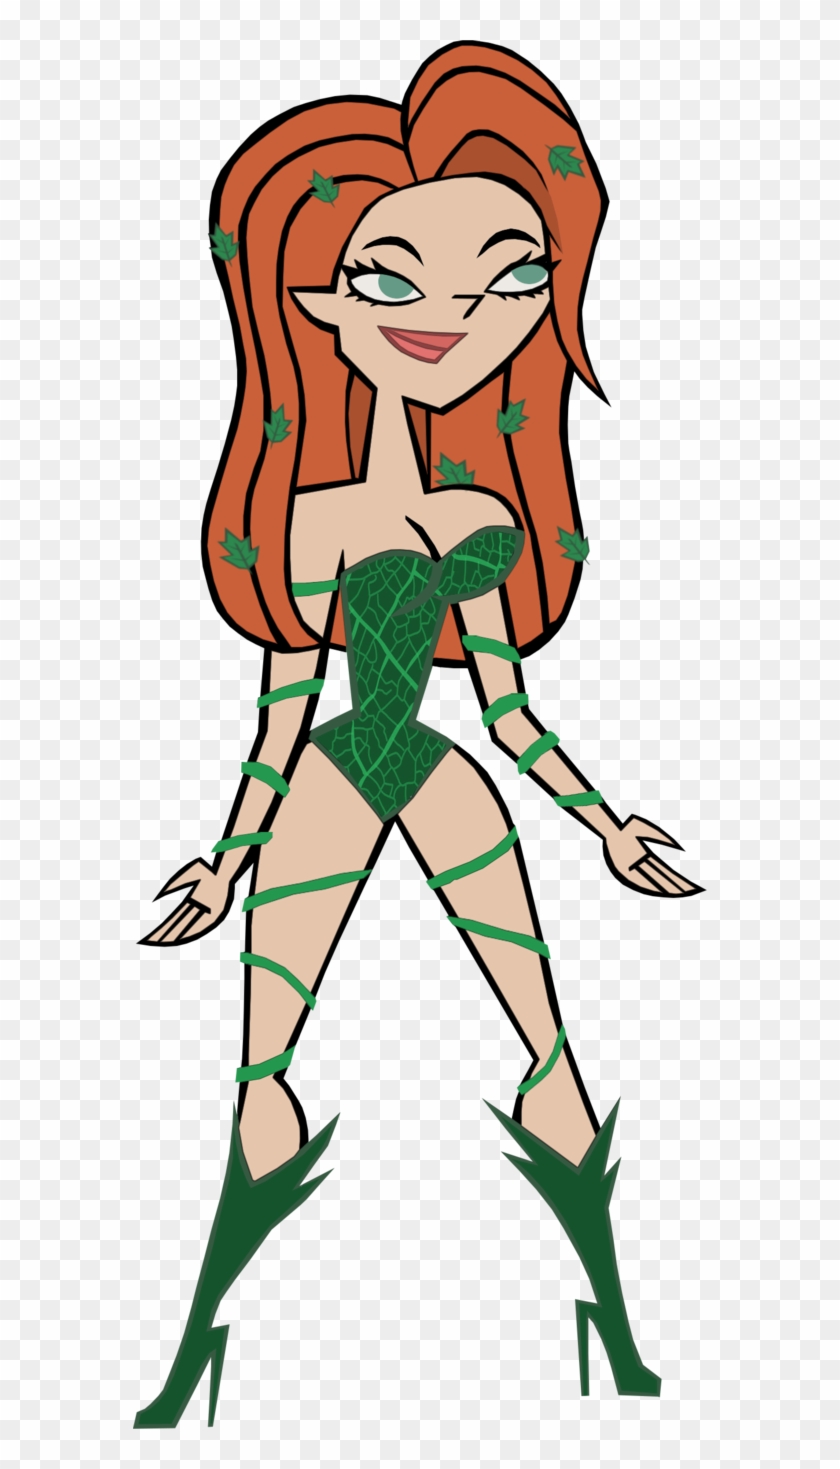 Poison Ivy By Vity-dream - Poison Ivy Cartoon Png #596145